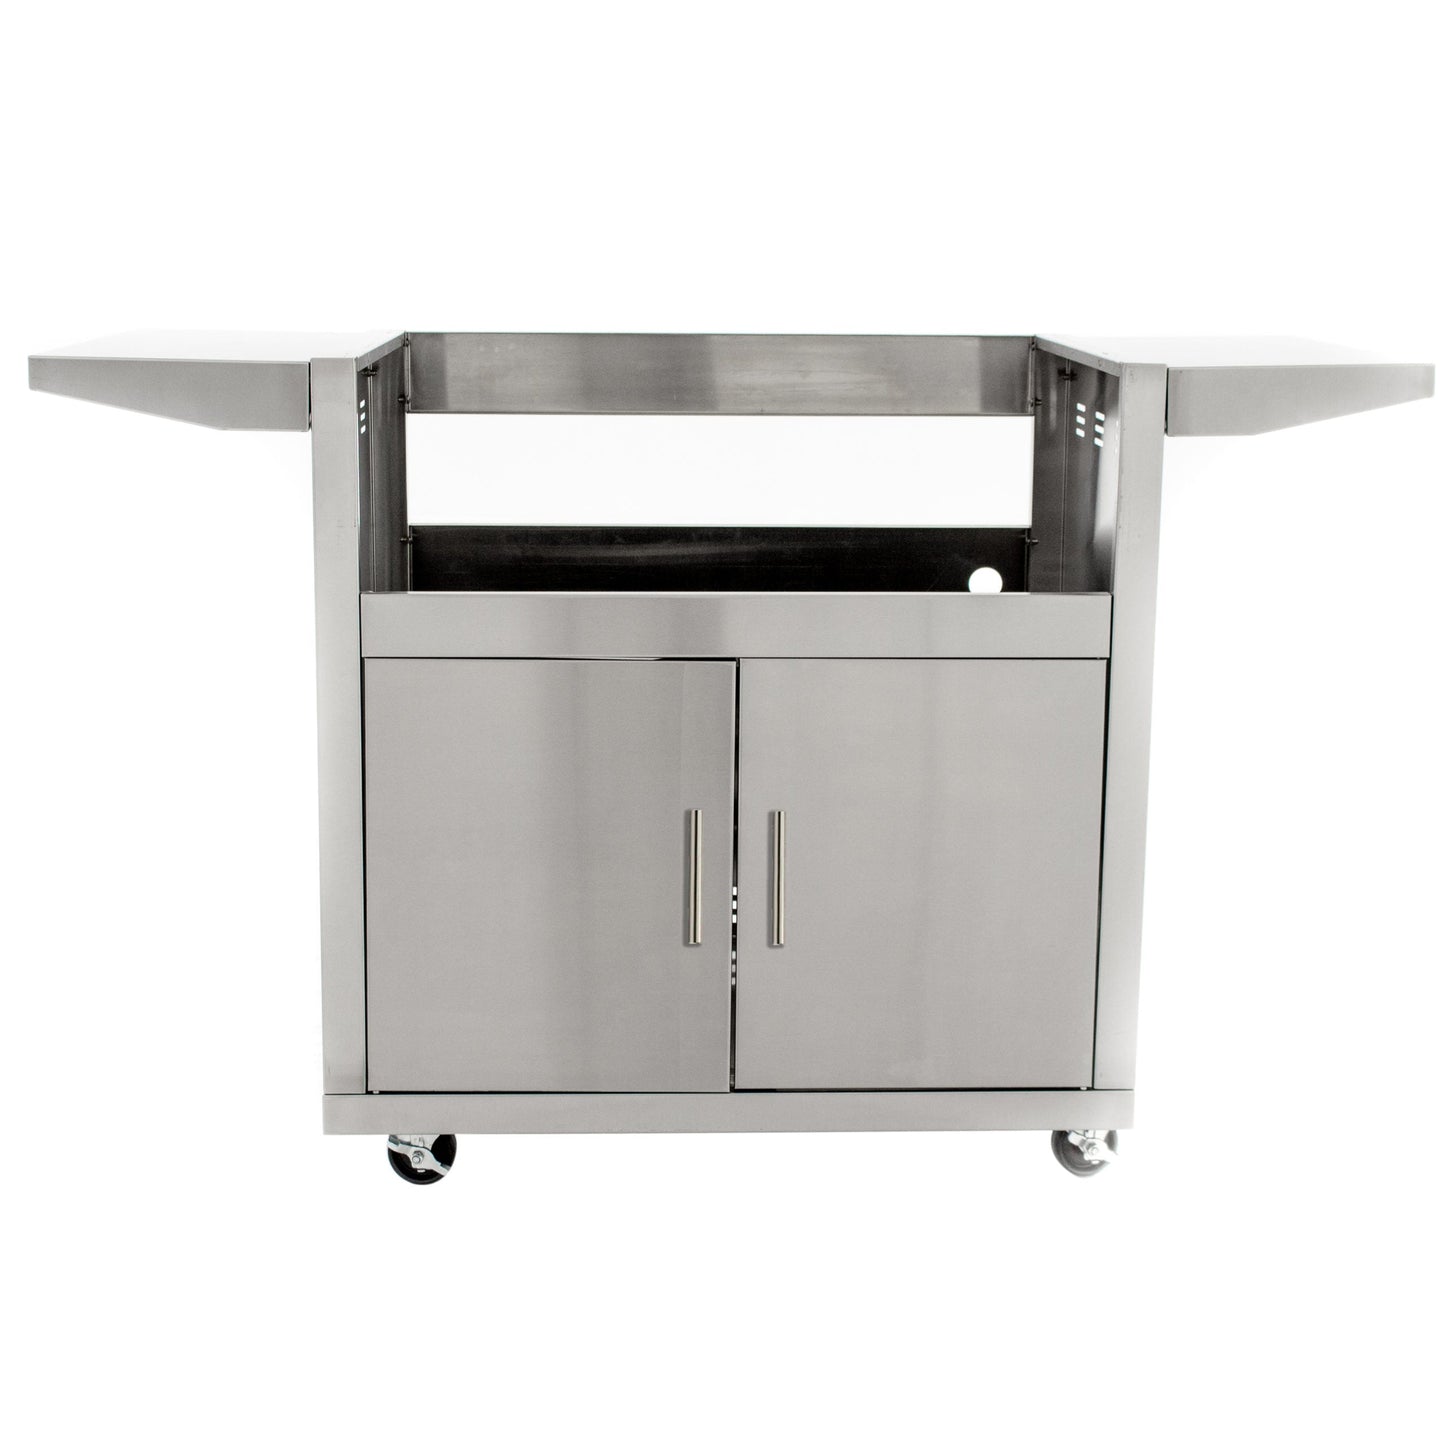 Blaze Grill Cart For 40-Inch Grills